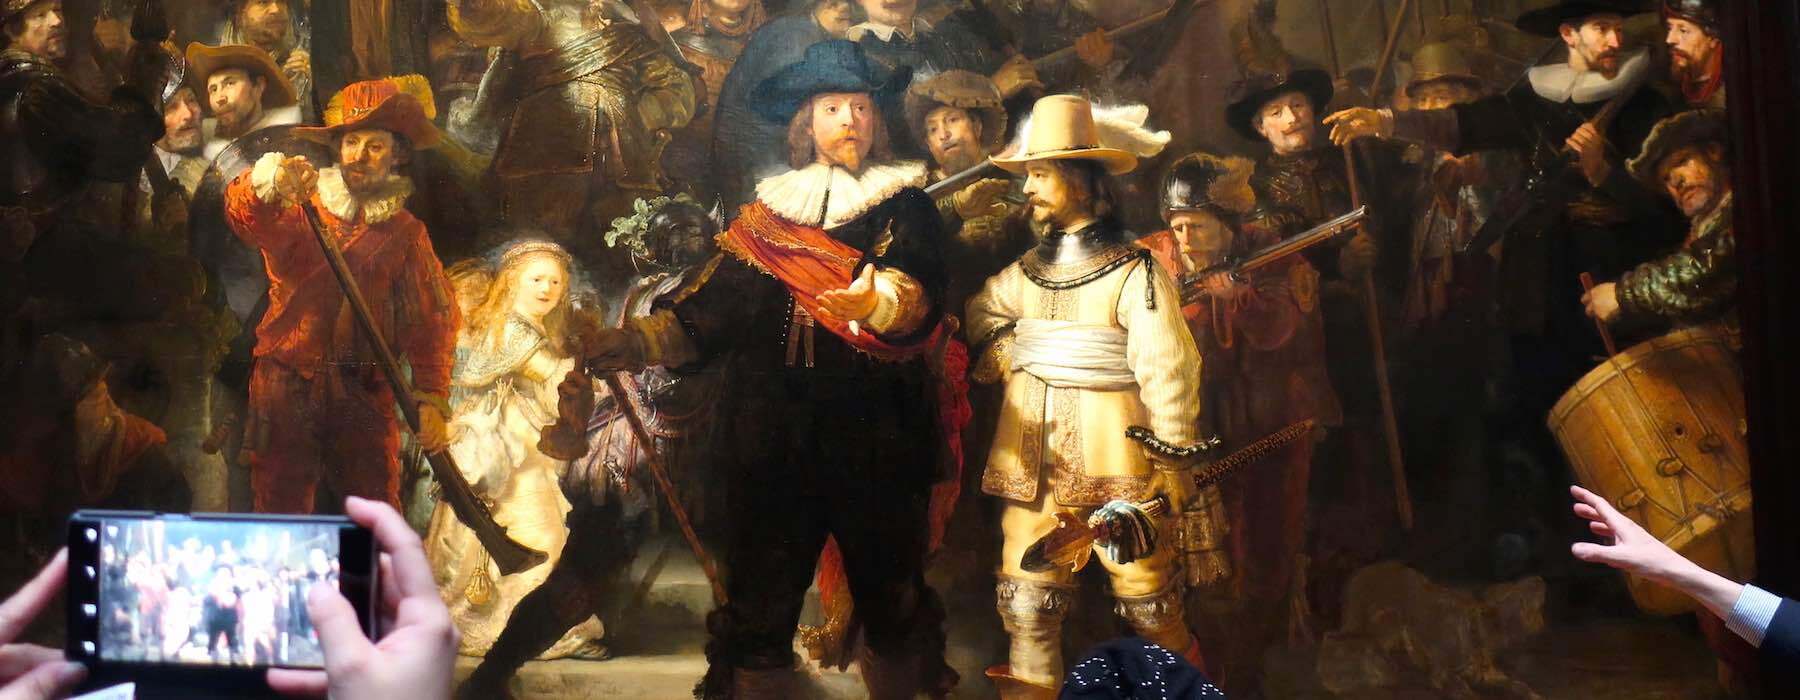 Rembrandt Paintings Nightwatch